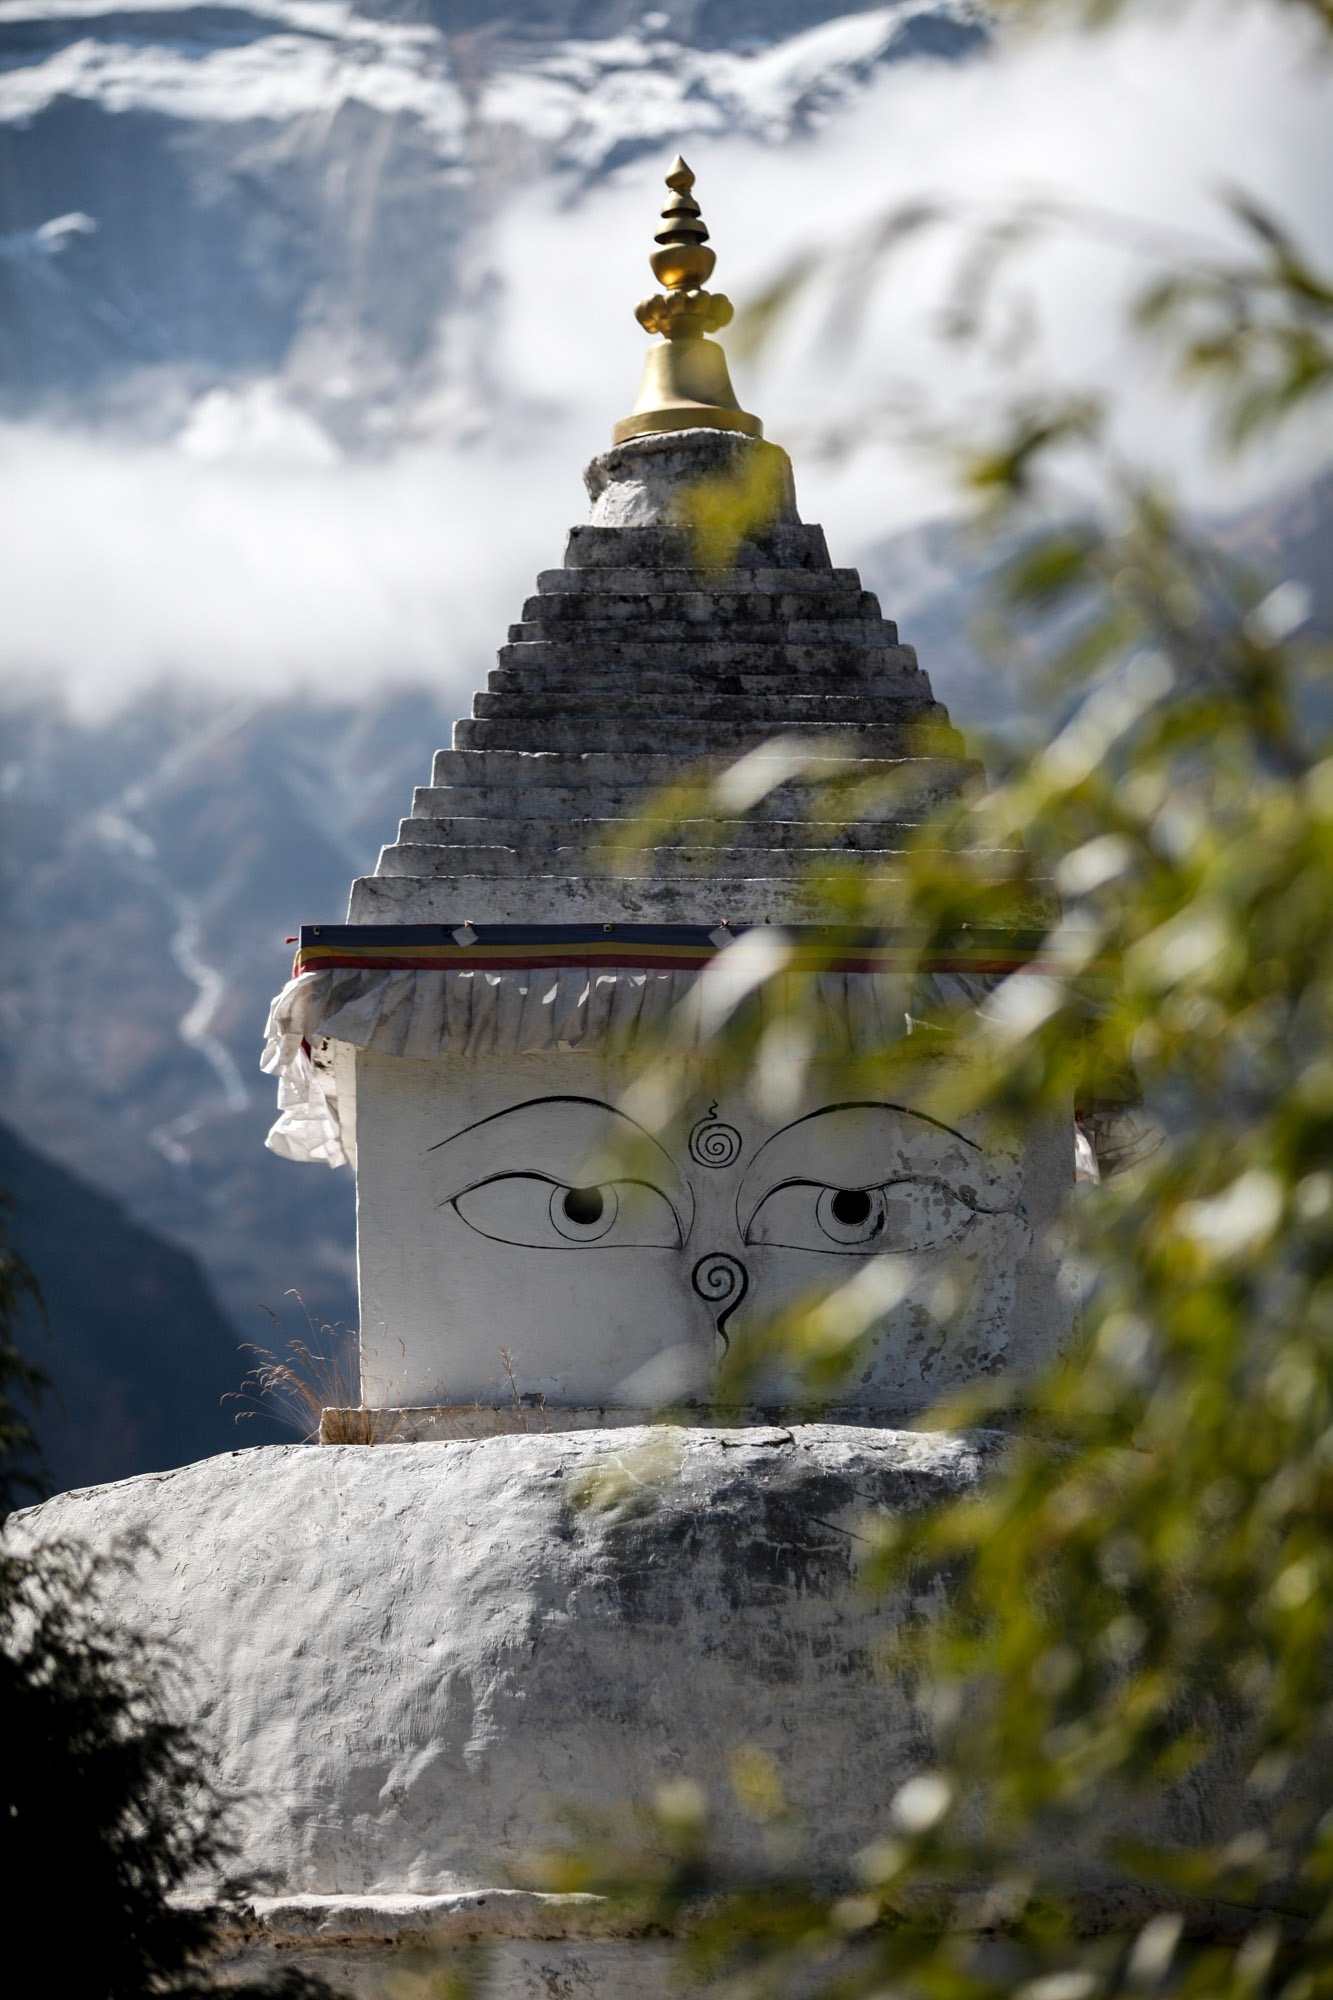 Stupa in the Himalayas, hiding behind a tree